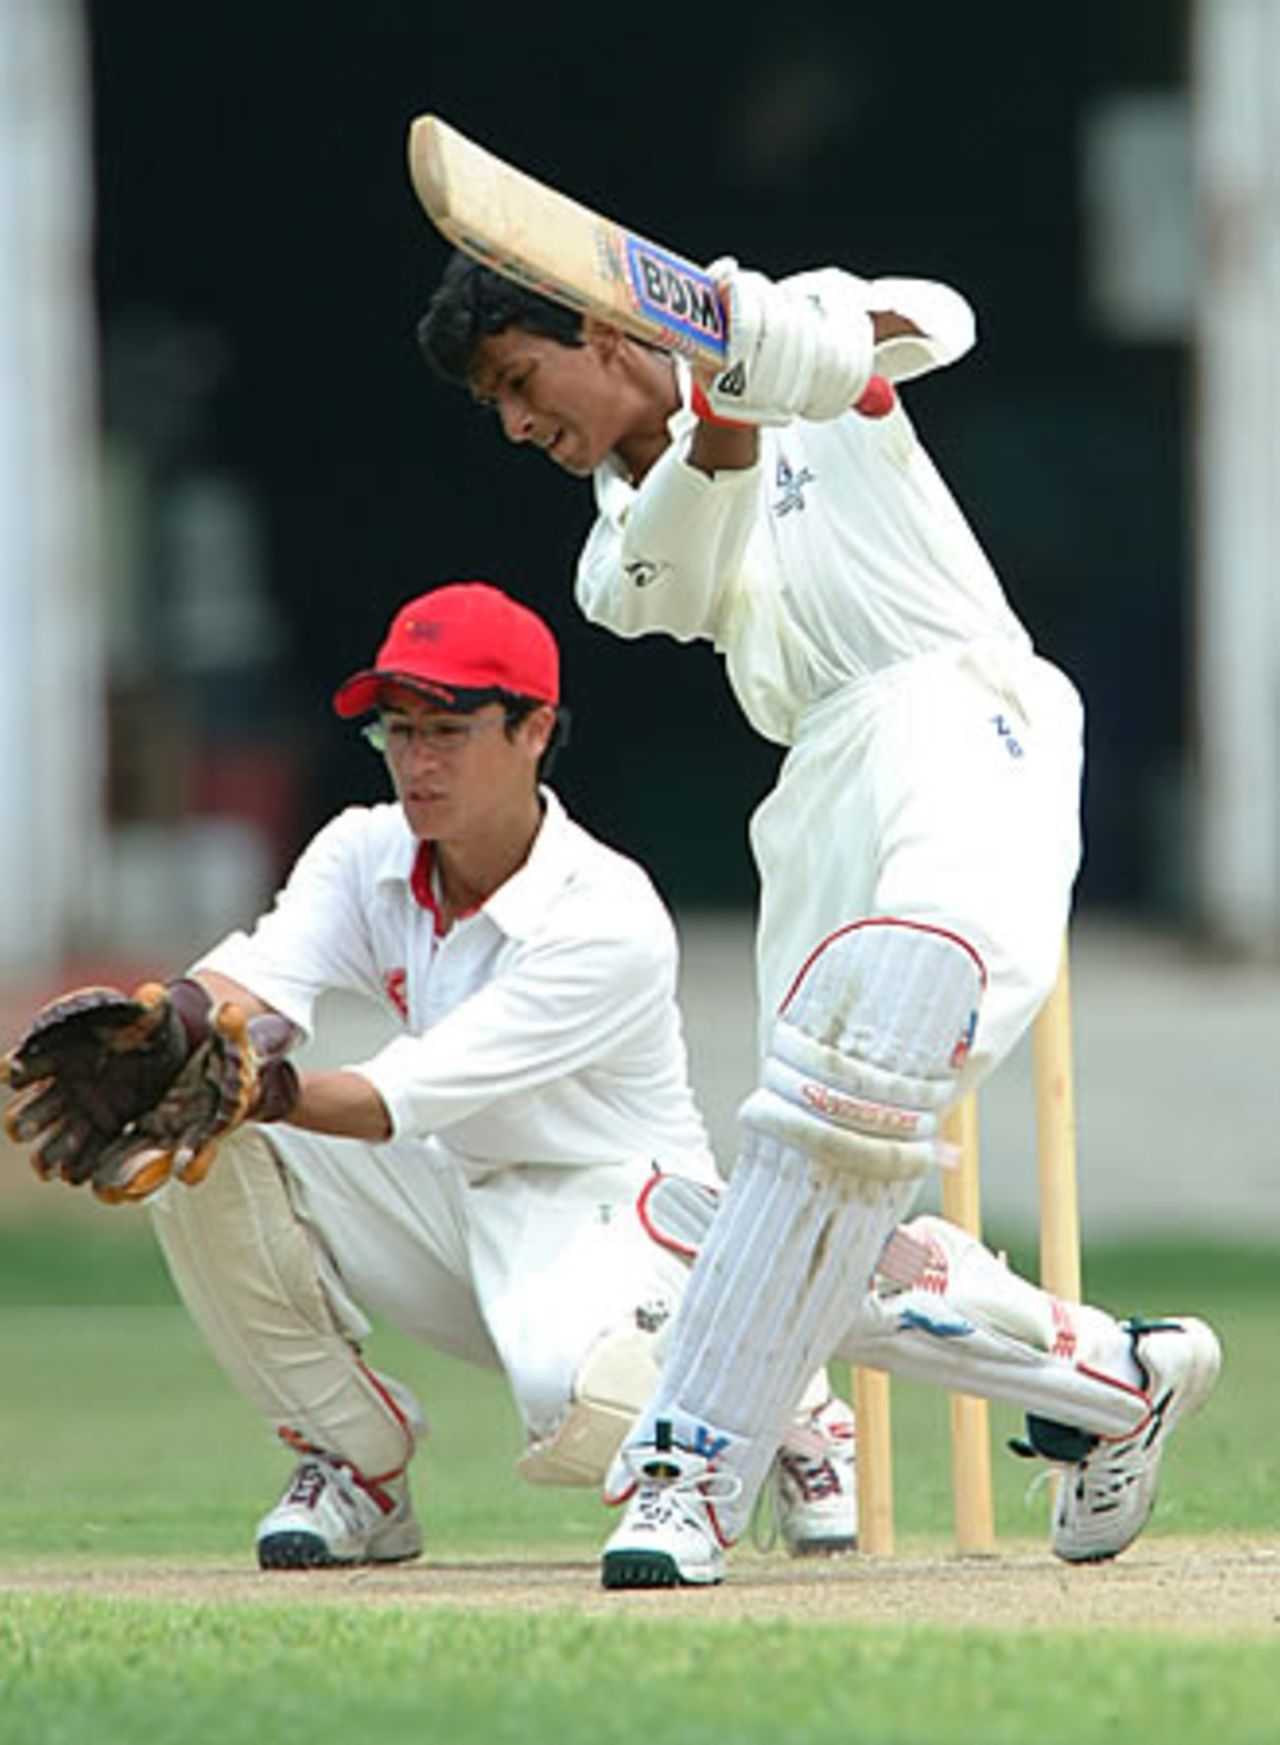 Darshil Upendra with a fine off-drive, Hong Kong Under-19s v Thailand Under-19s at National Stadium Karachi, Youth Asia Cup 2003, 21 July 2003.